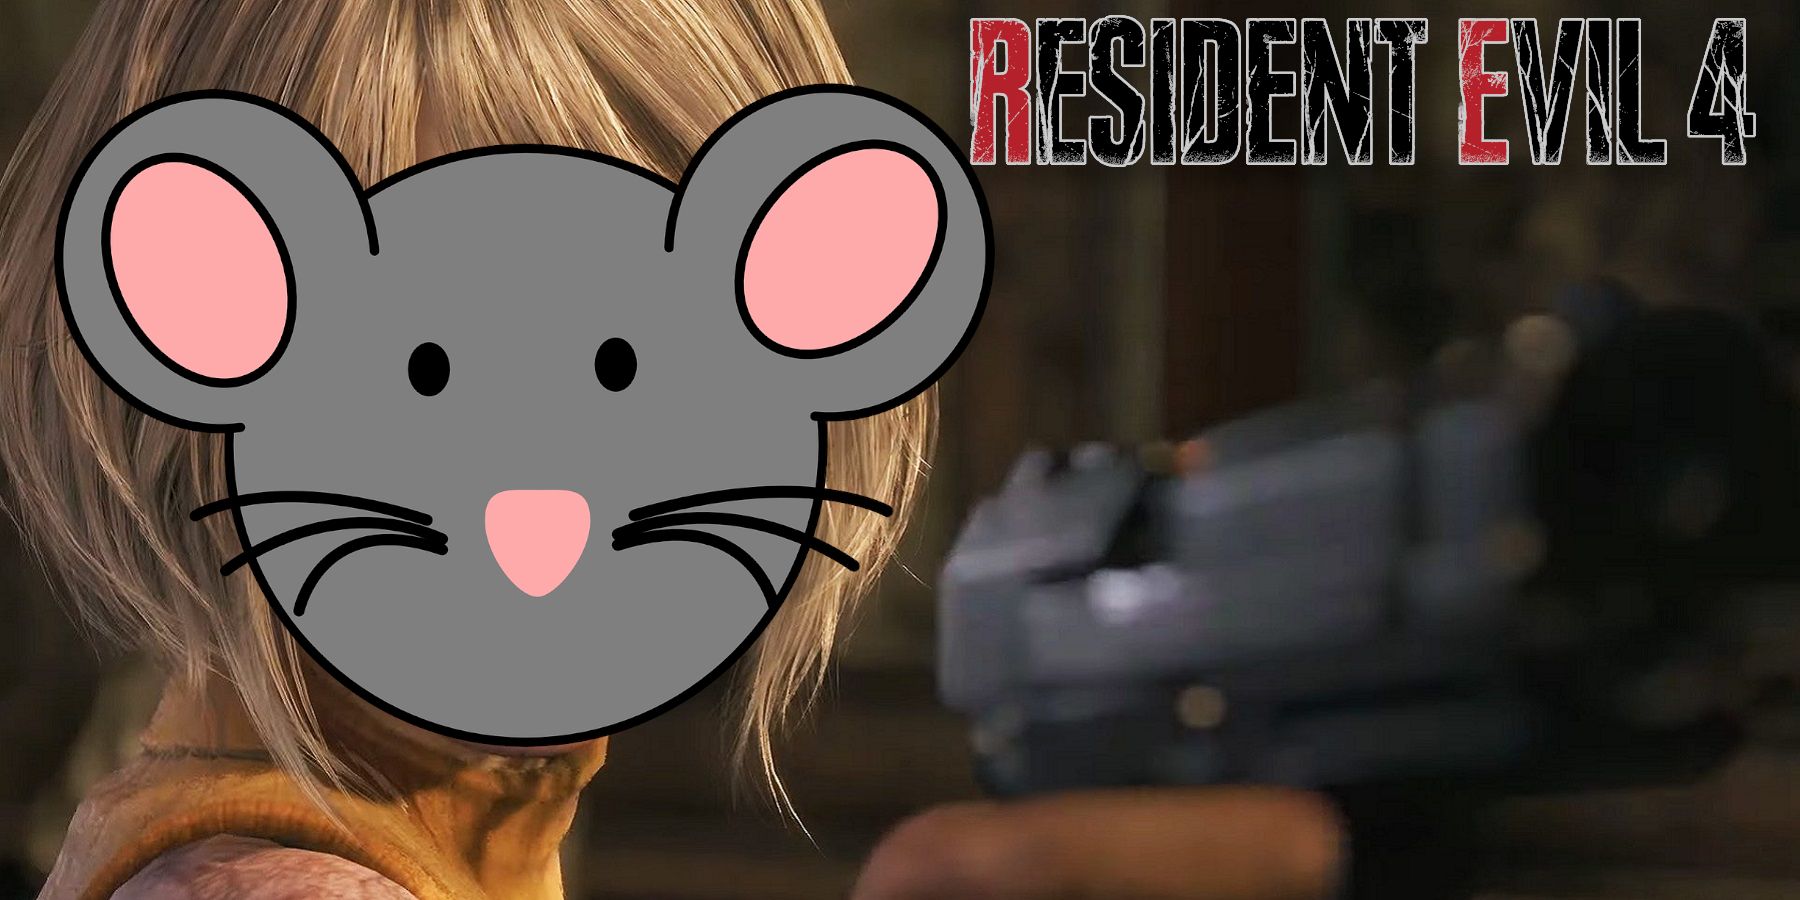 Image from the Resident Evil 4 remake showing Ashley with a cartoon mouse face.